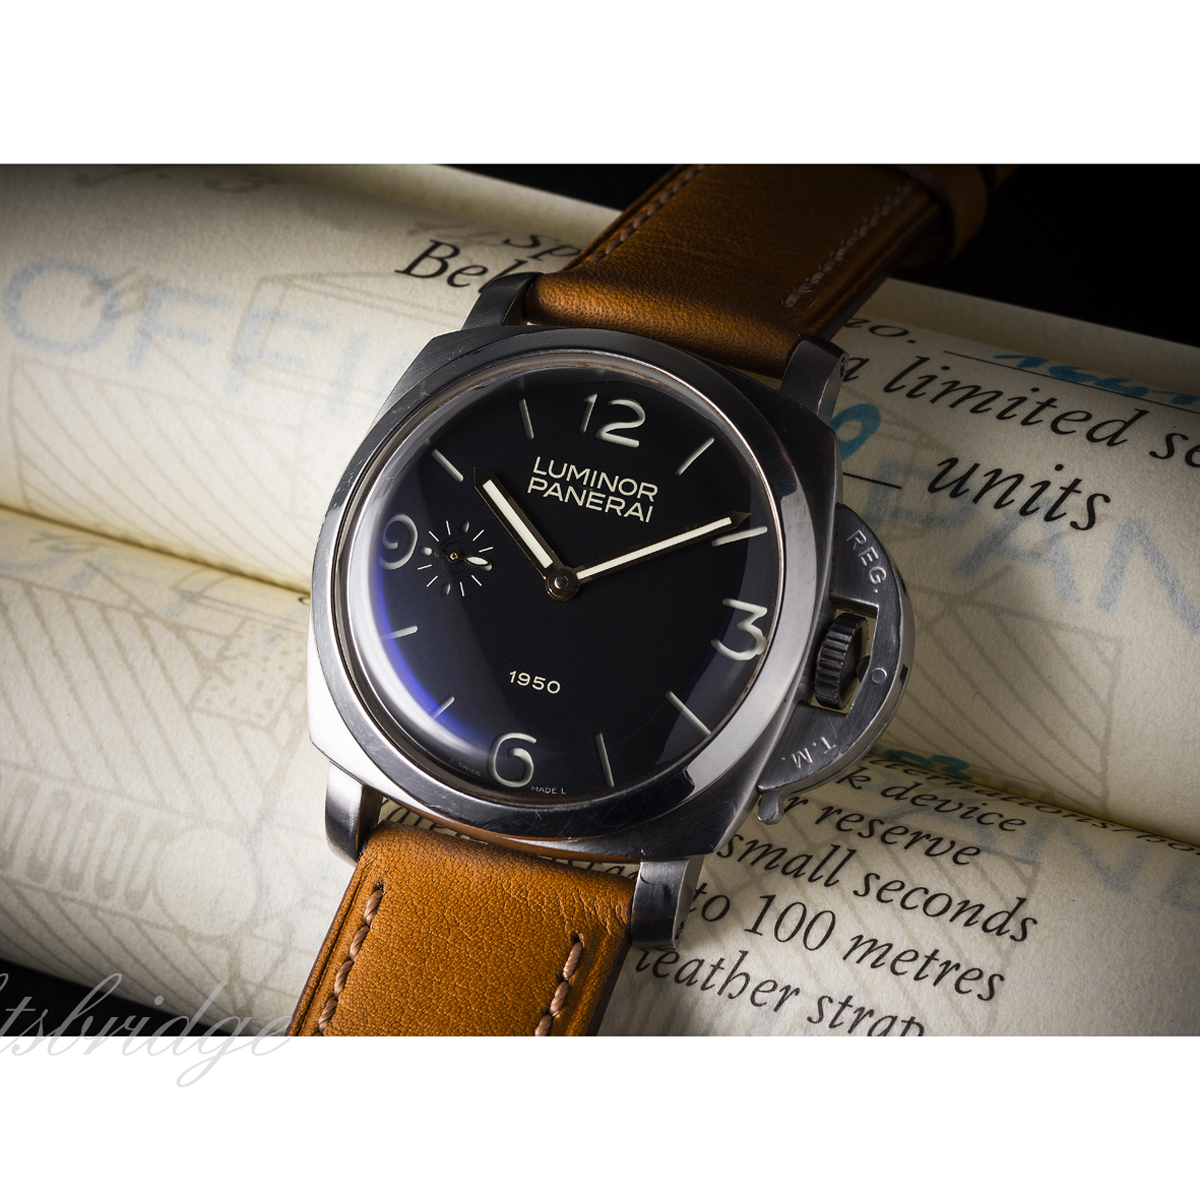 A GENTLEMAN'S STAINLESS STEEL PANERAI LUMINOR 1950 WRIST WATCH DATED 2003, PAM127, WITH BOX, - Image 2 of 2